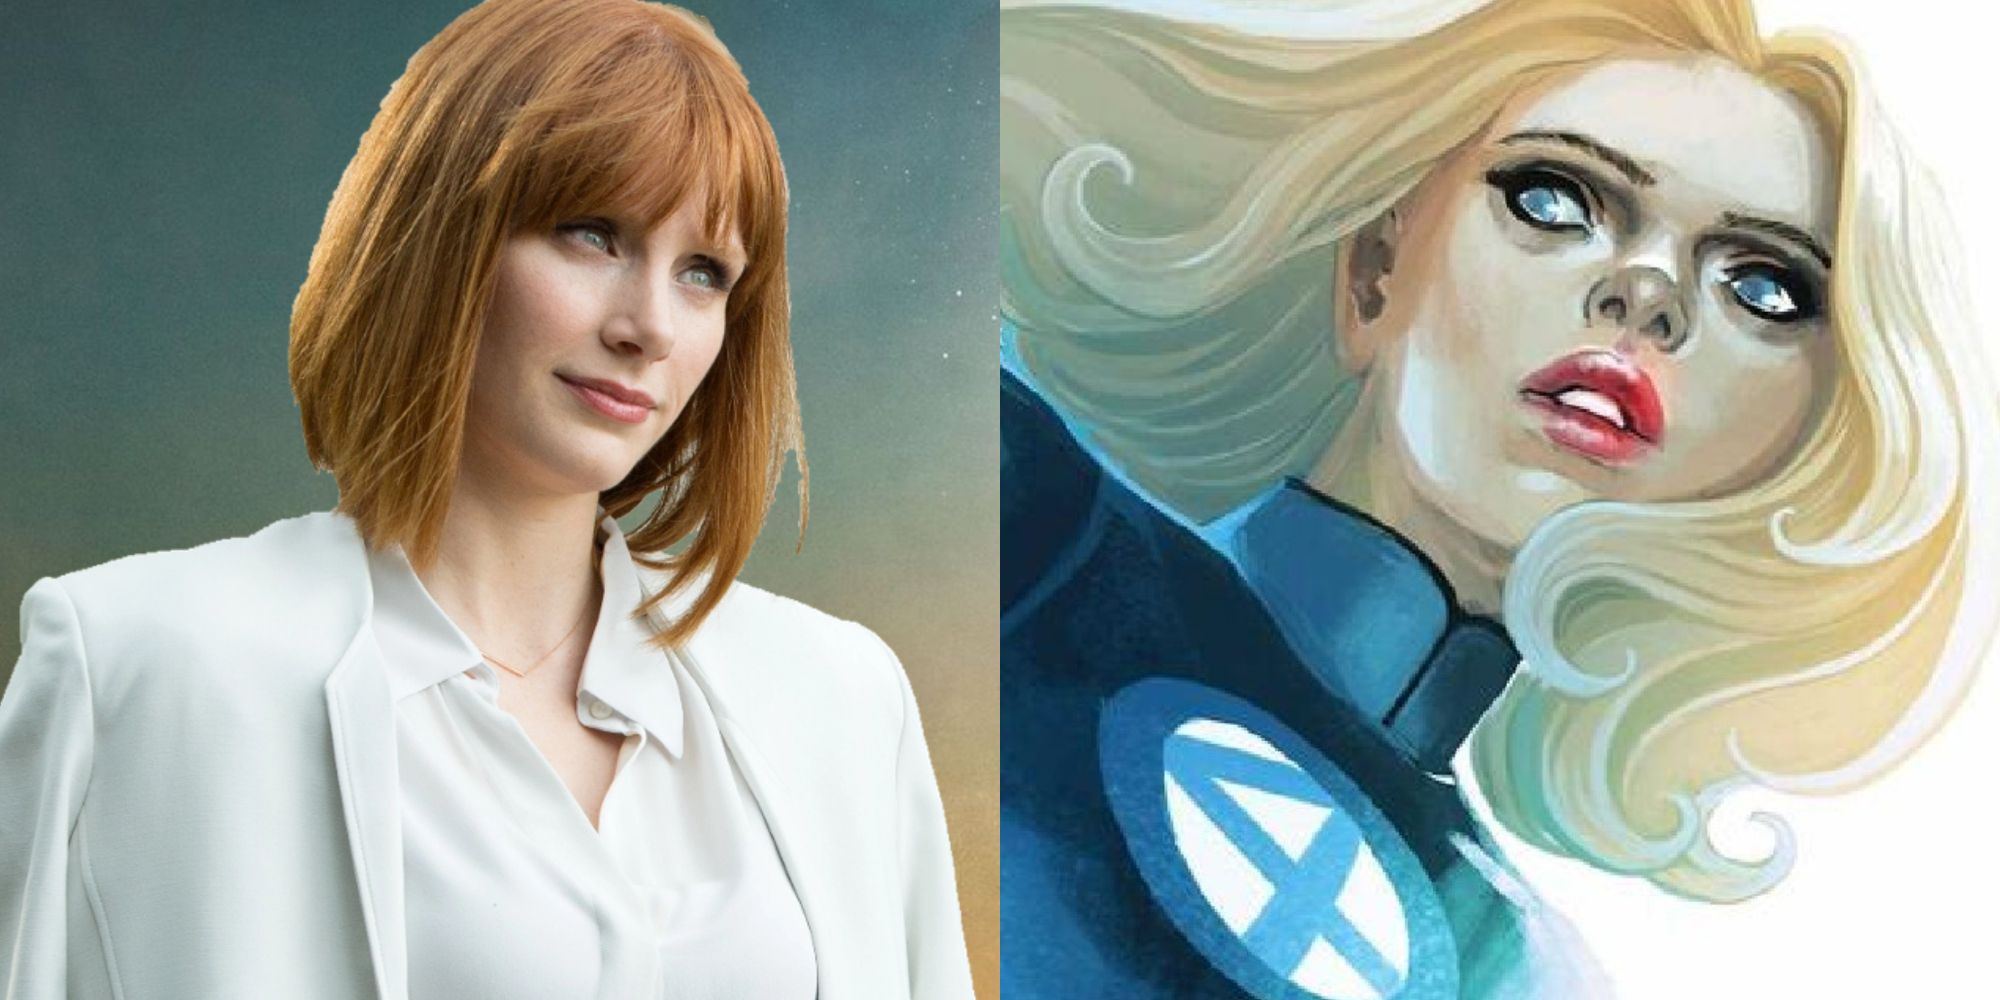 A splite image of Bryce Dallas Howard and Sue Storm the Invisible Woman